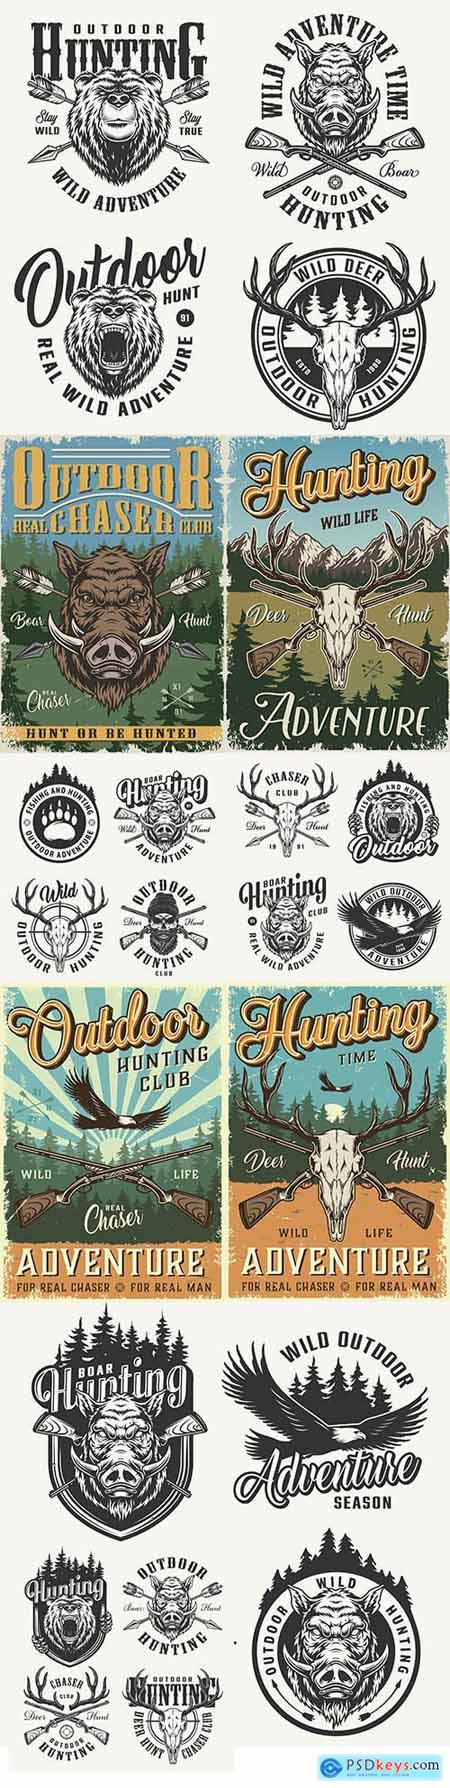 Hunting colourful poster and vintage monochrome club emblems